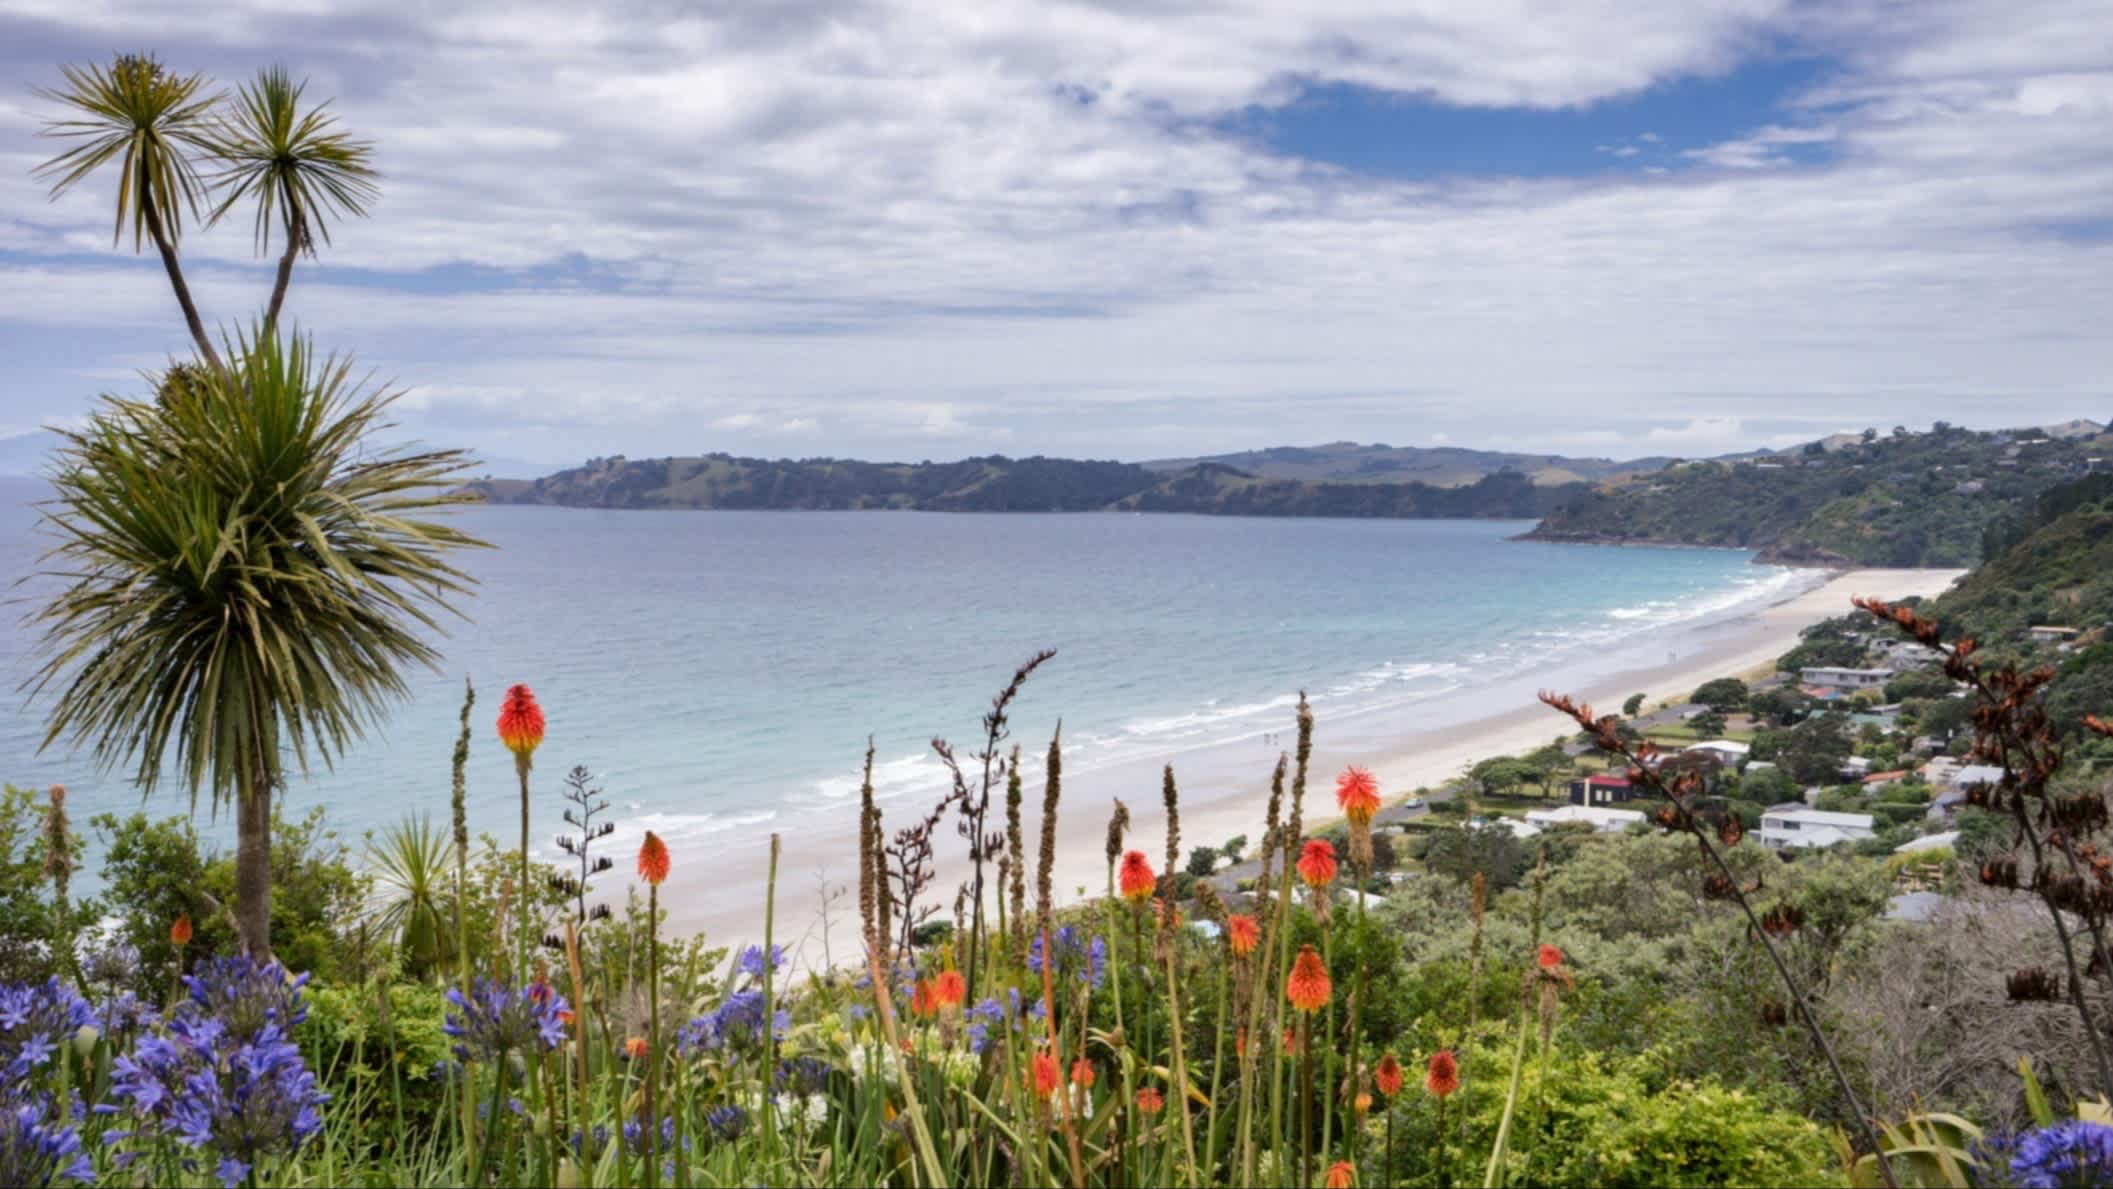 View of Onetangi Beach, Waiheke Island, New Zealand, with colorful vegetation in the foreground, cliffs, white sand and clear water in the background
